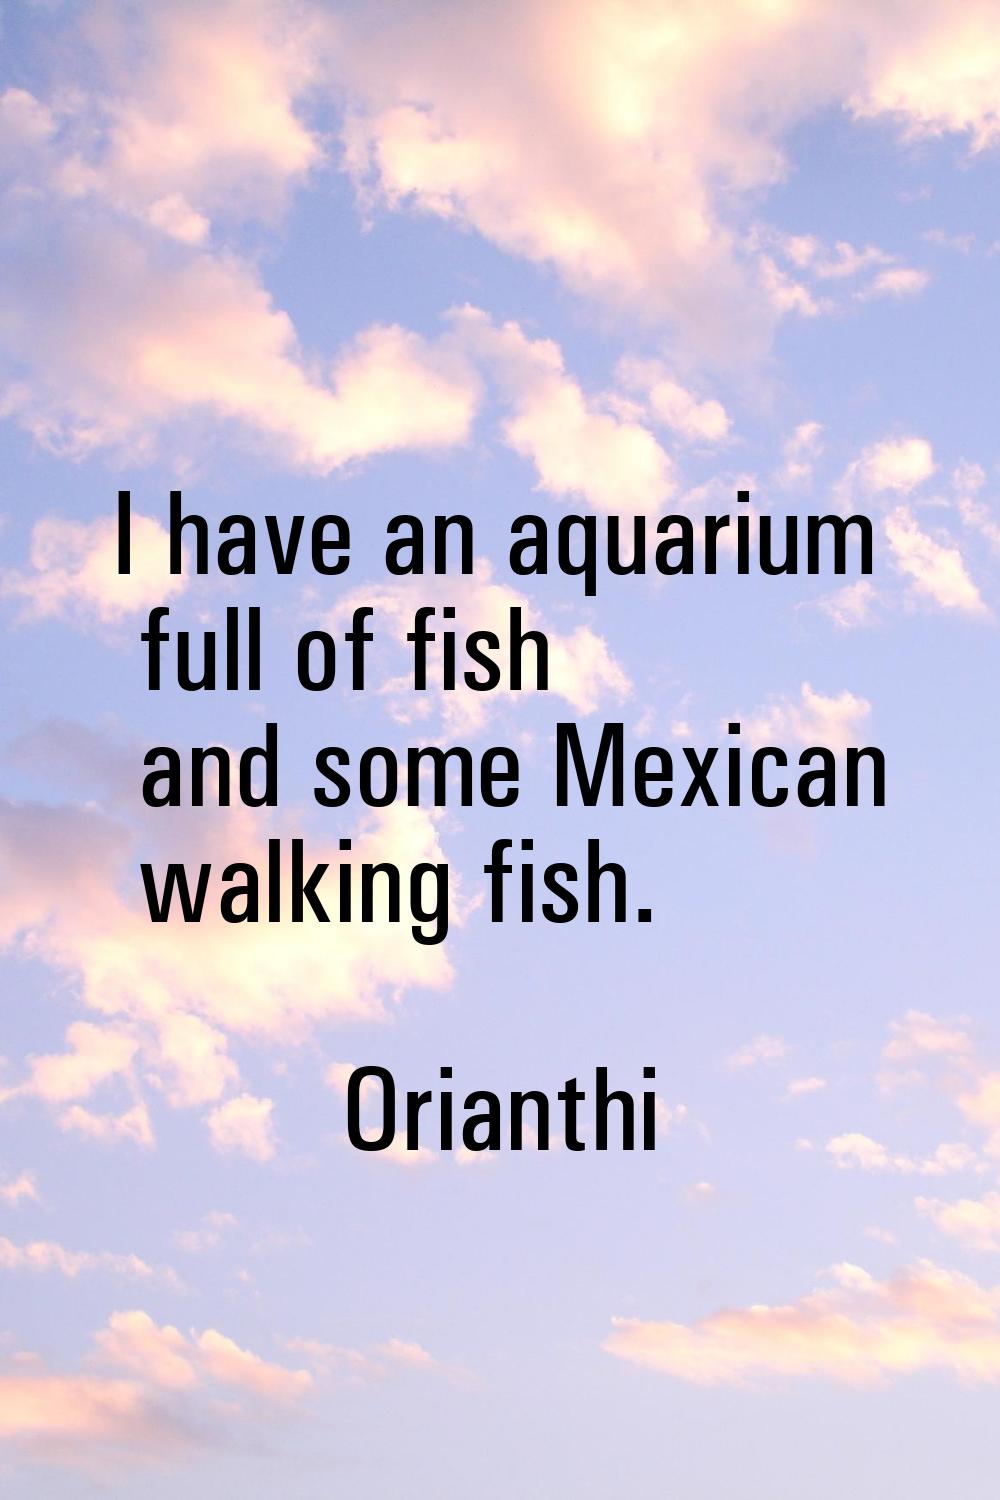 I have an aquarium full of fish and some Mexican walking fish.